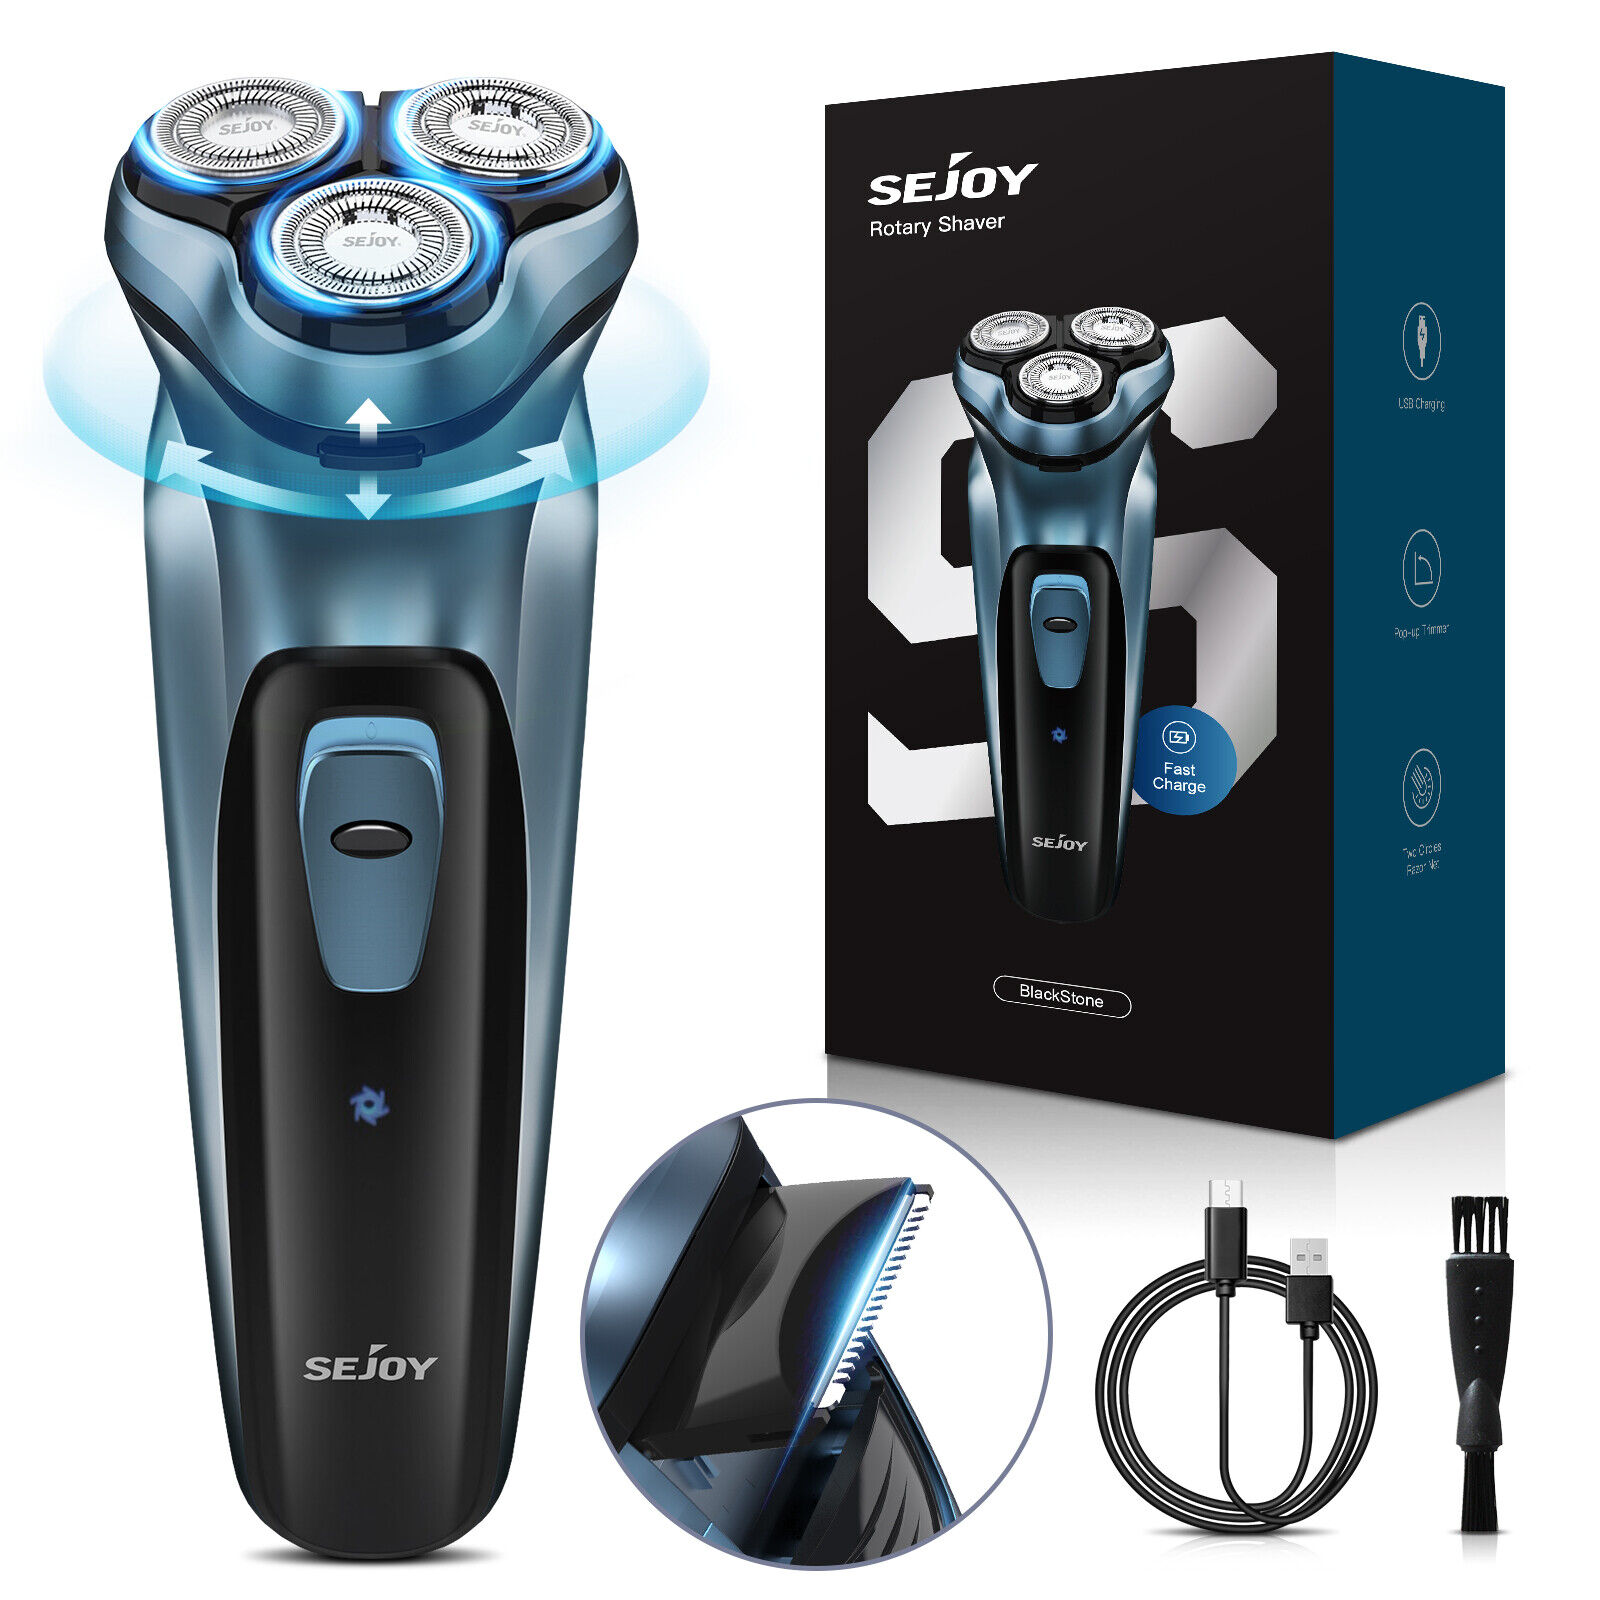 SEJOY Electric Rotary Shaver with Trimmer